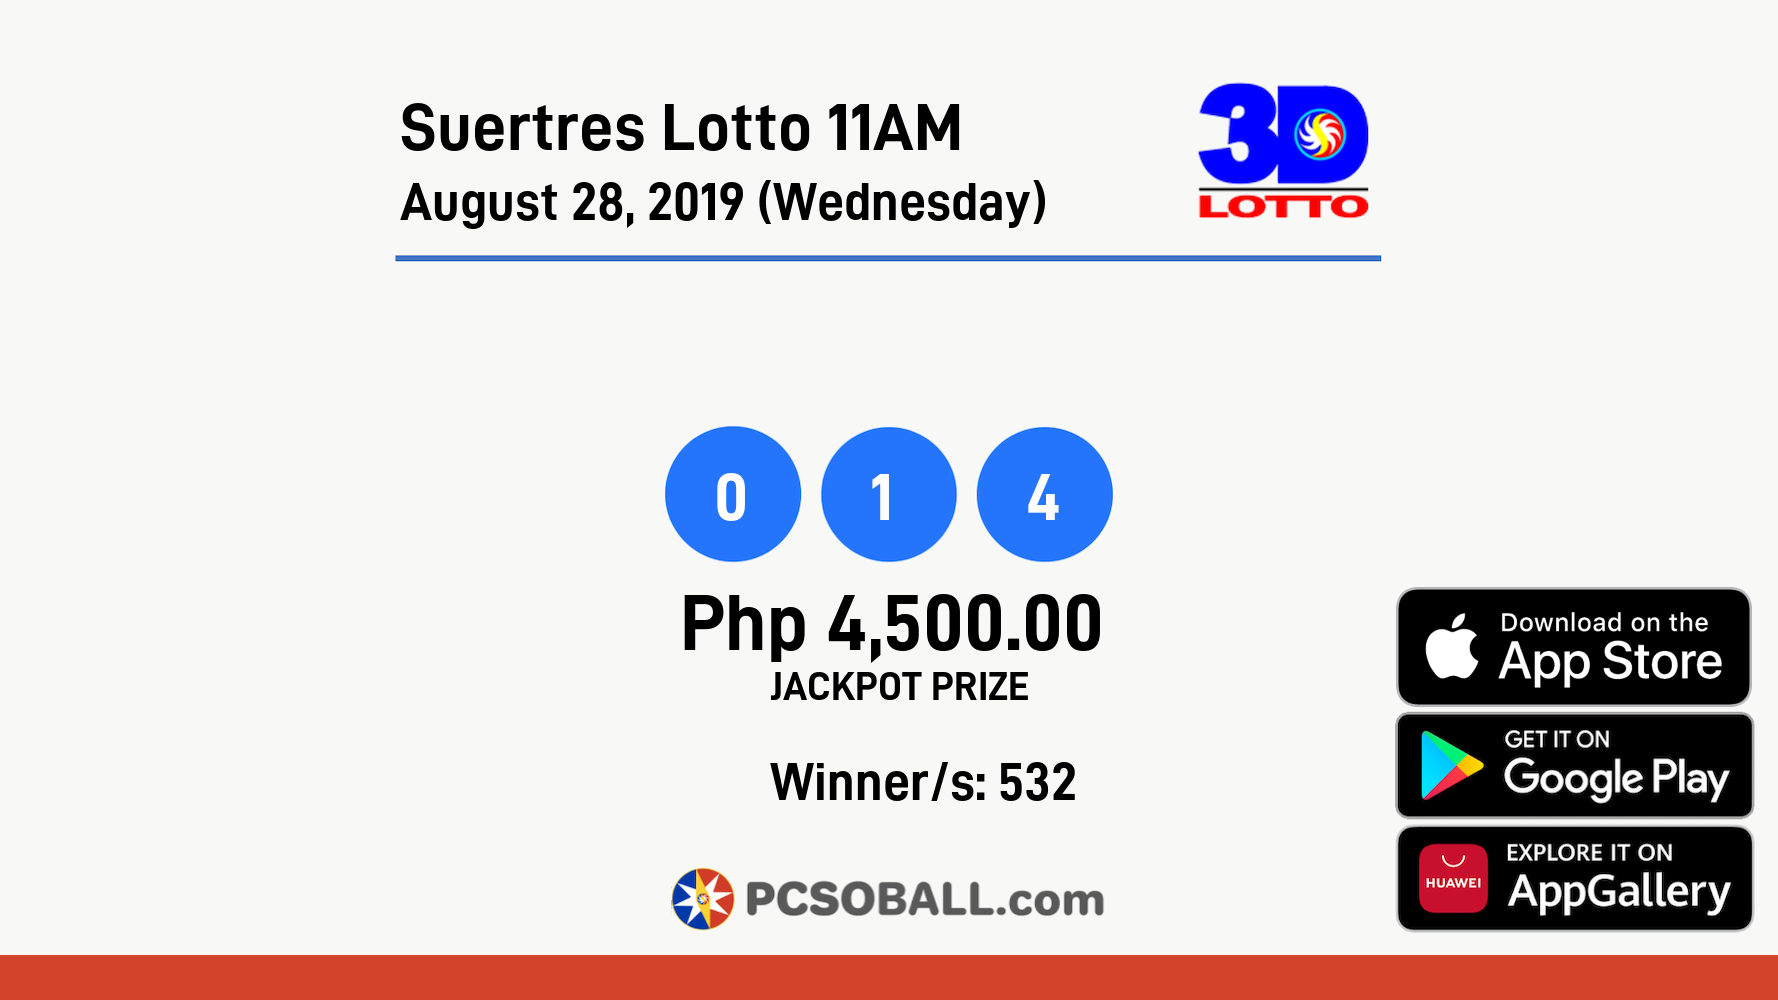 Suertres Lotto 11AM August 28, 2019 (Wednesday) Result